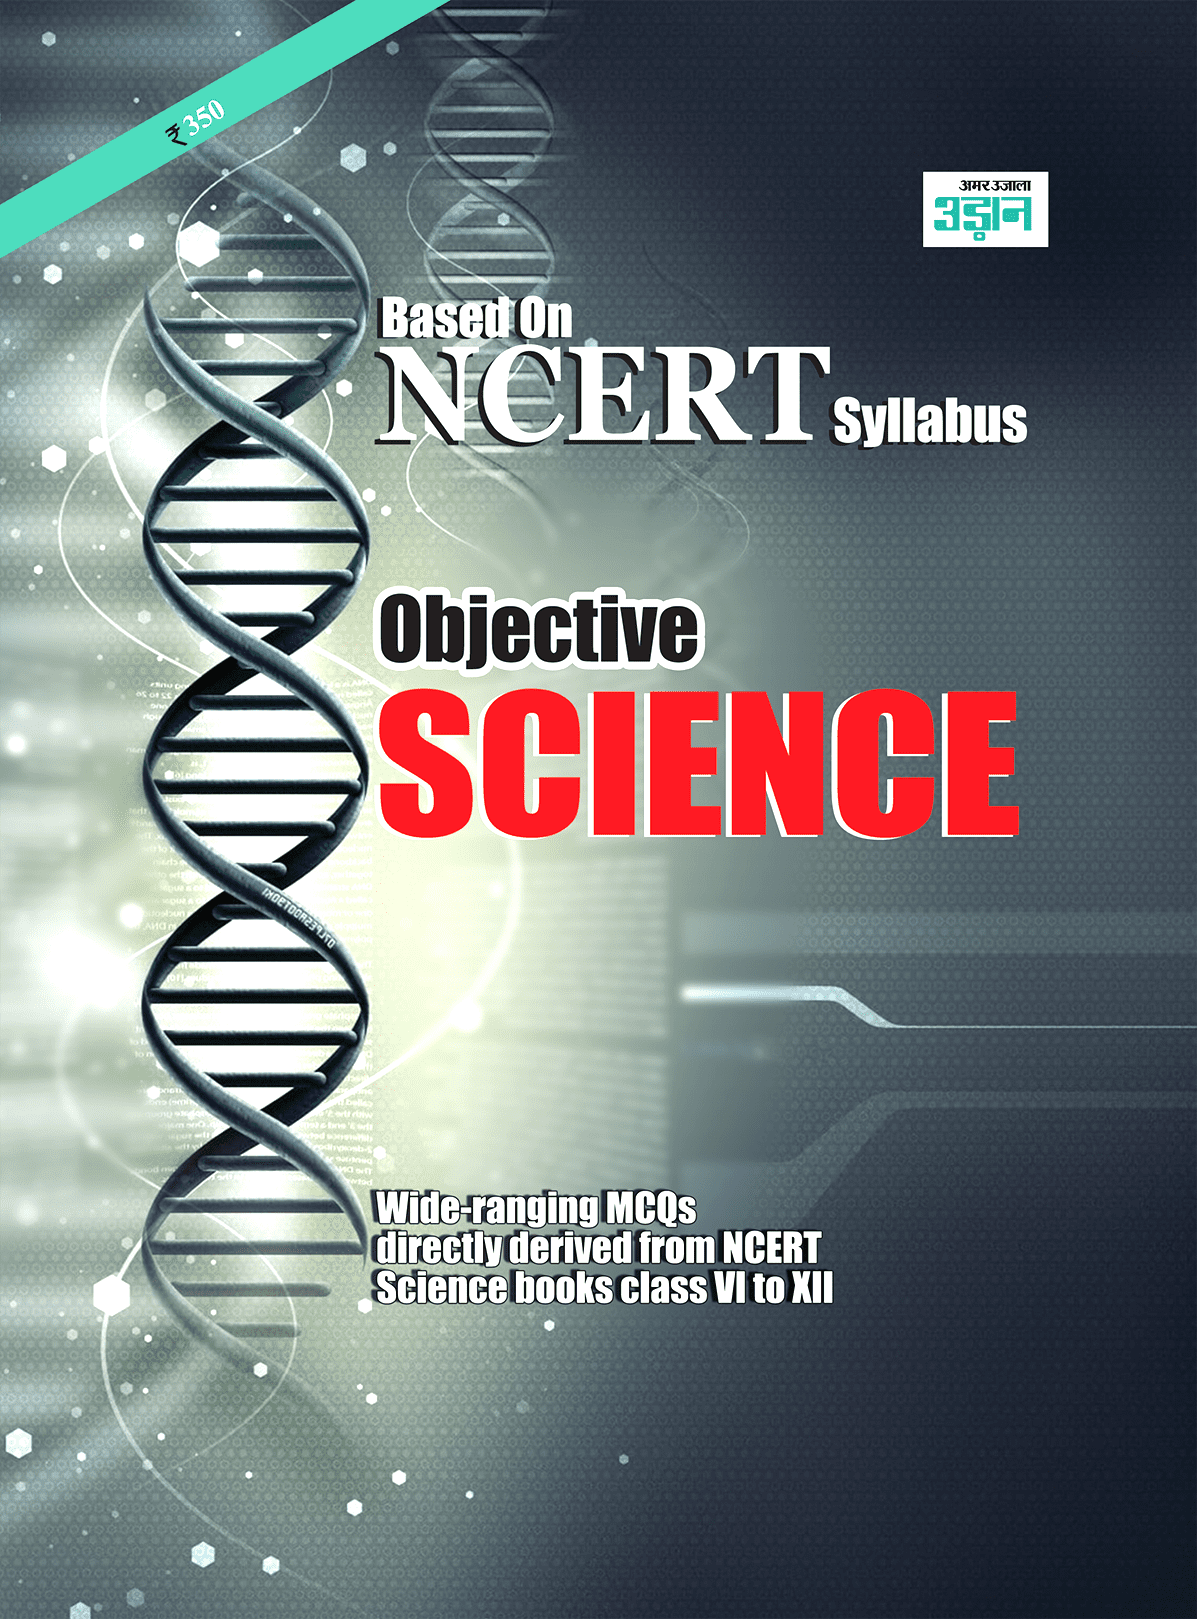 English NCERT Objective Science (Print Book)